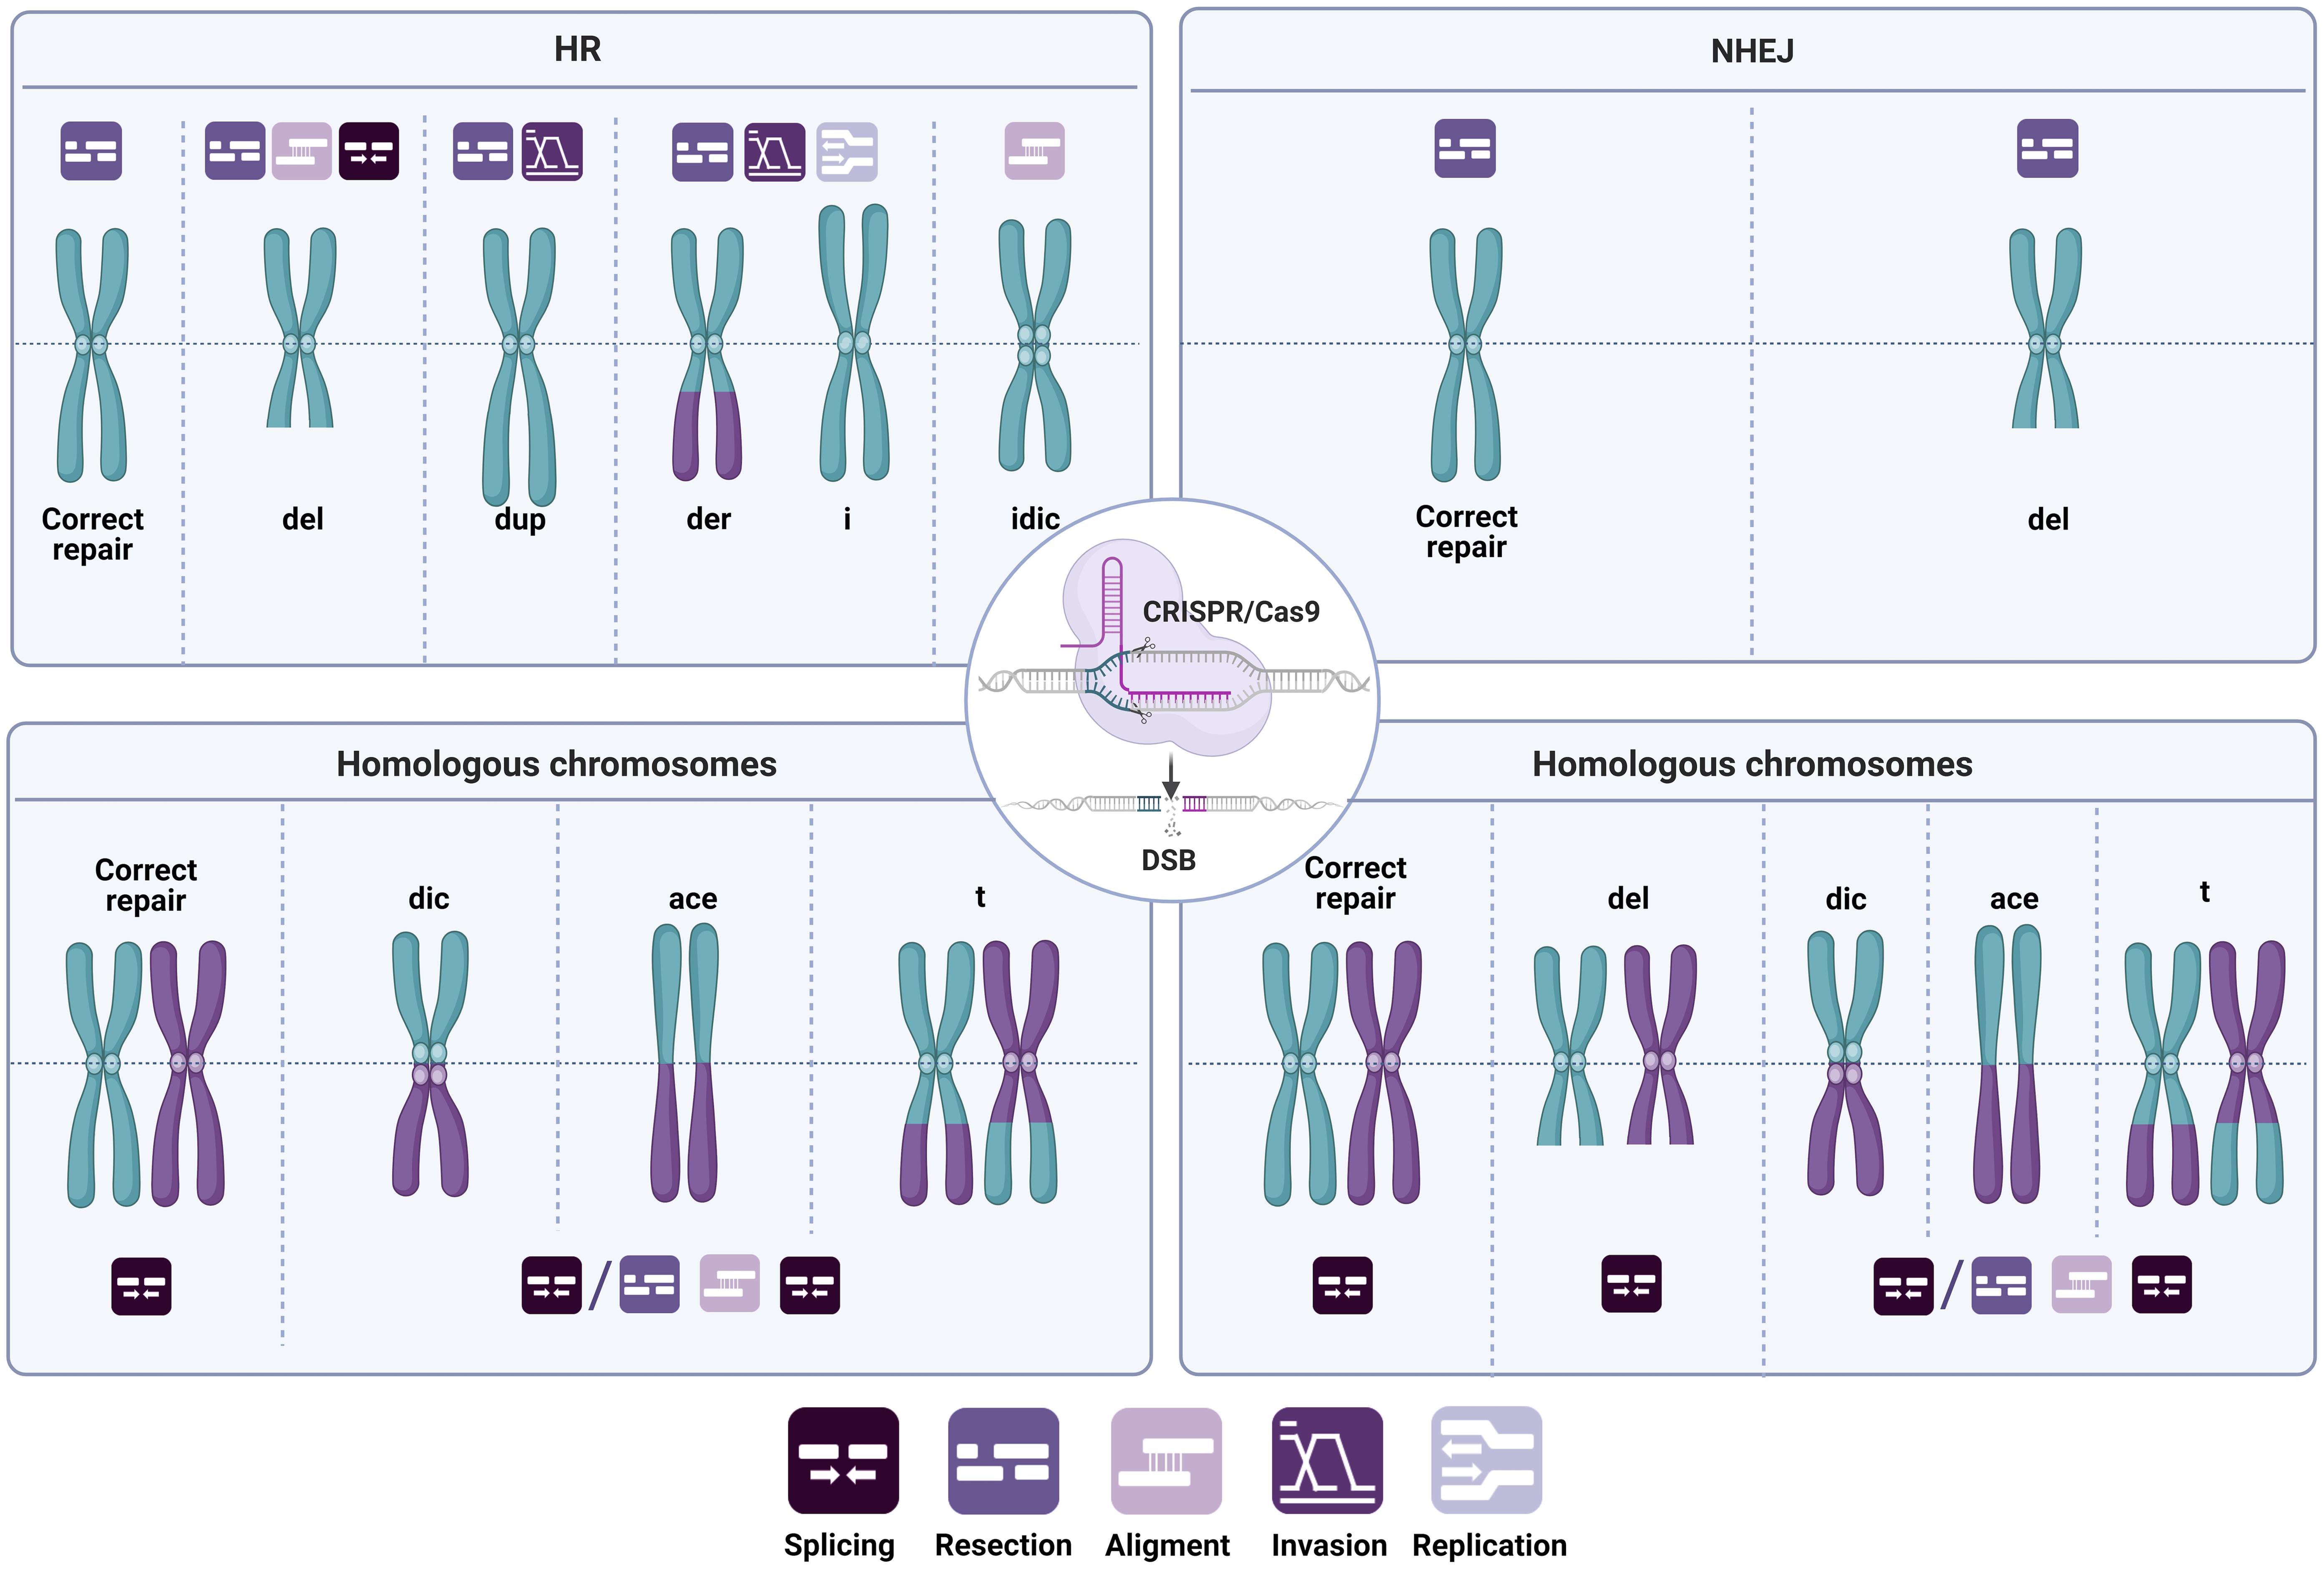 Induction of chromosomal alterations by CRISPR/Cas9.